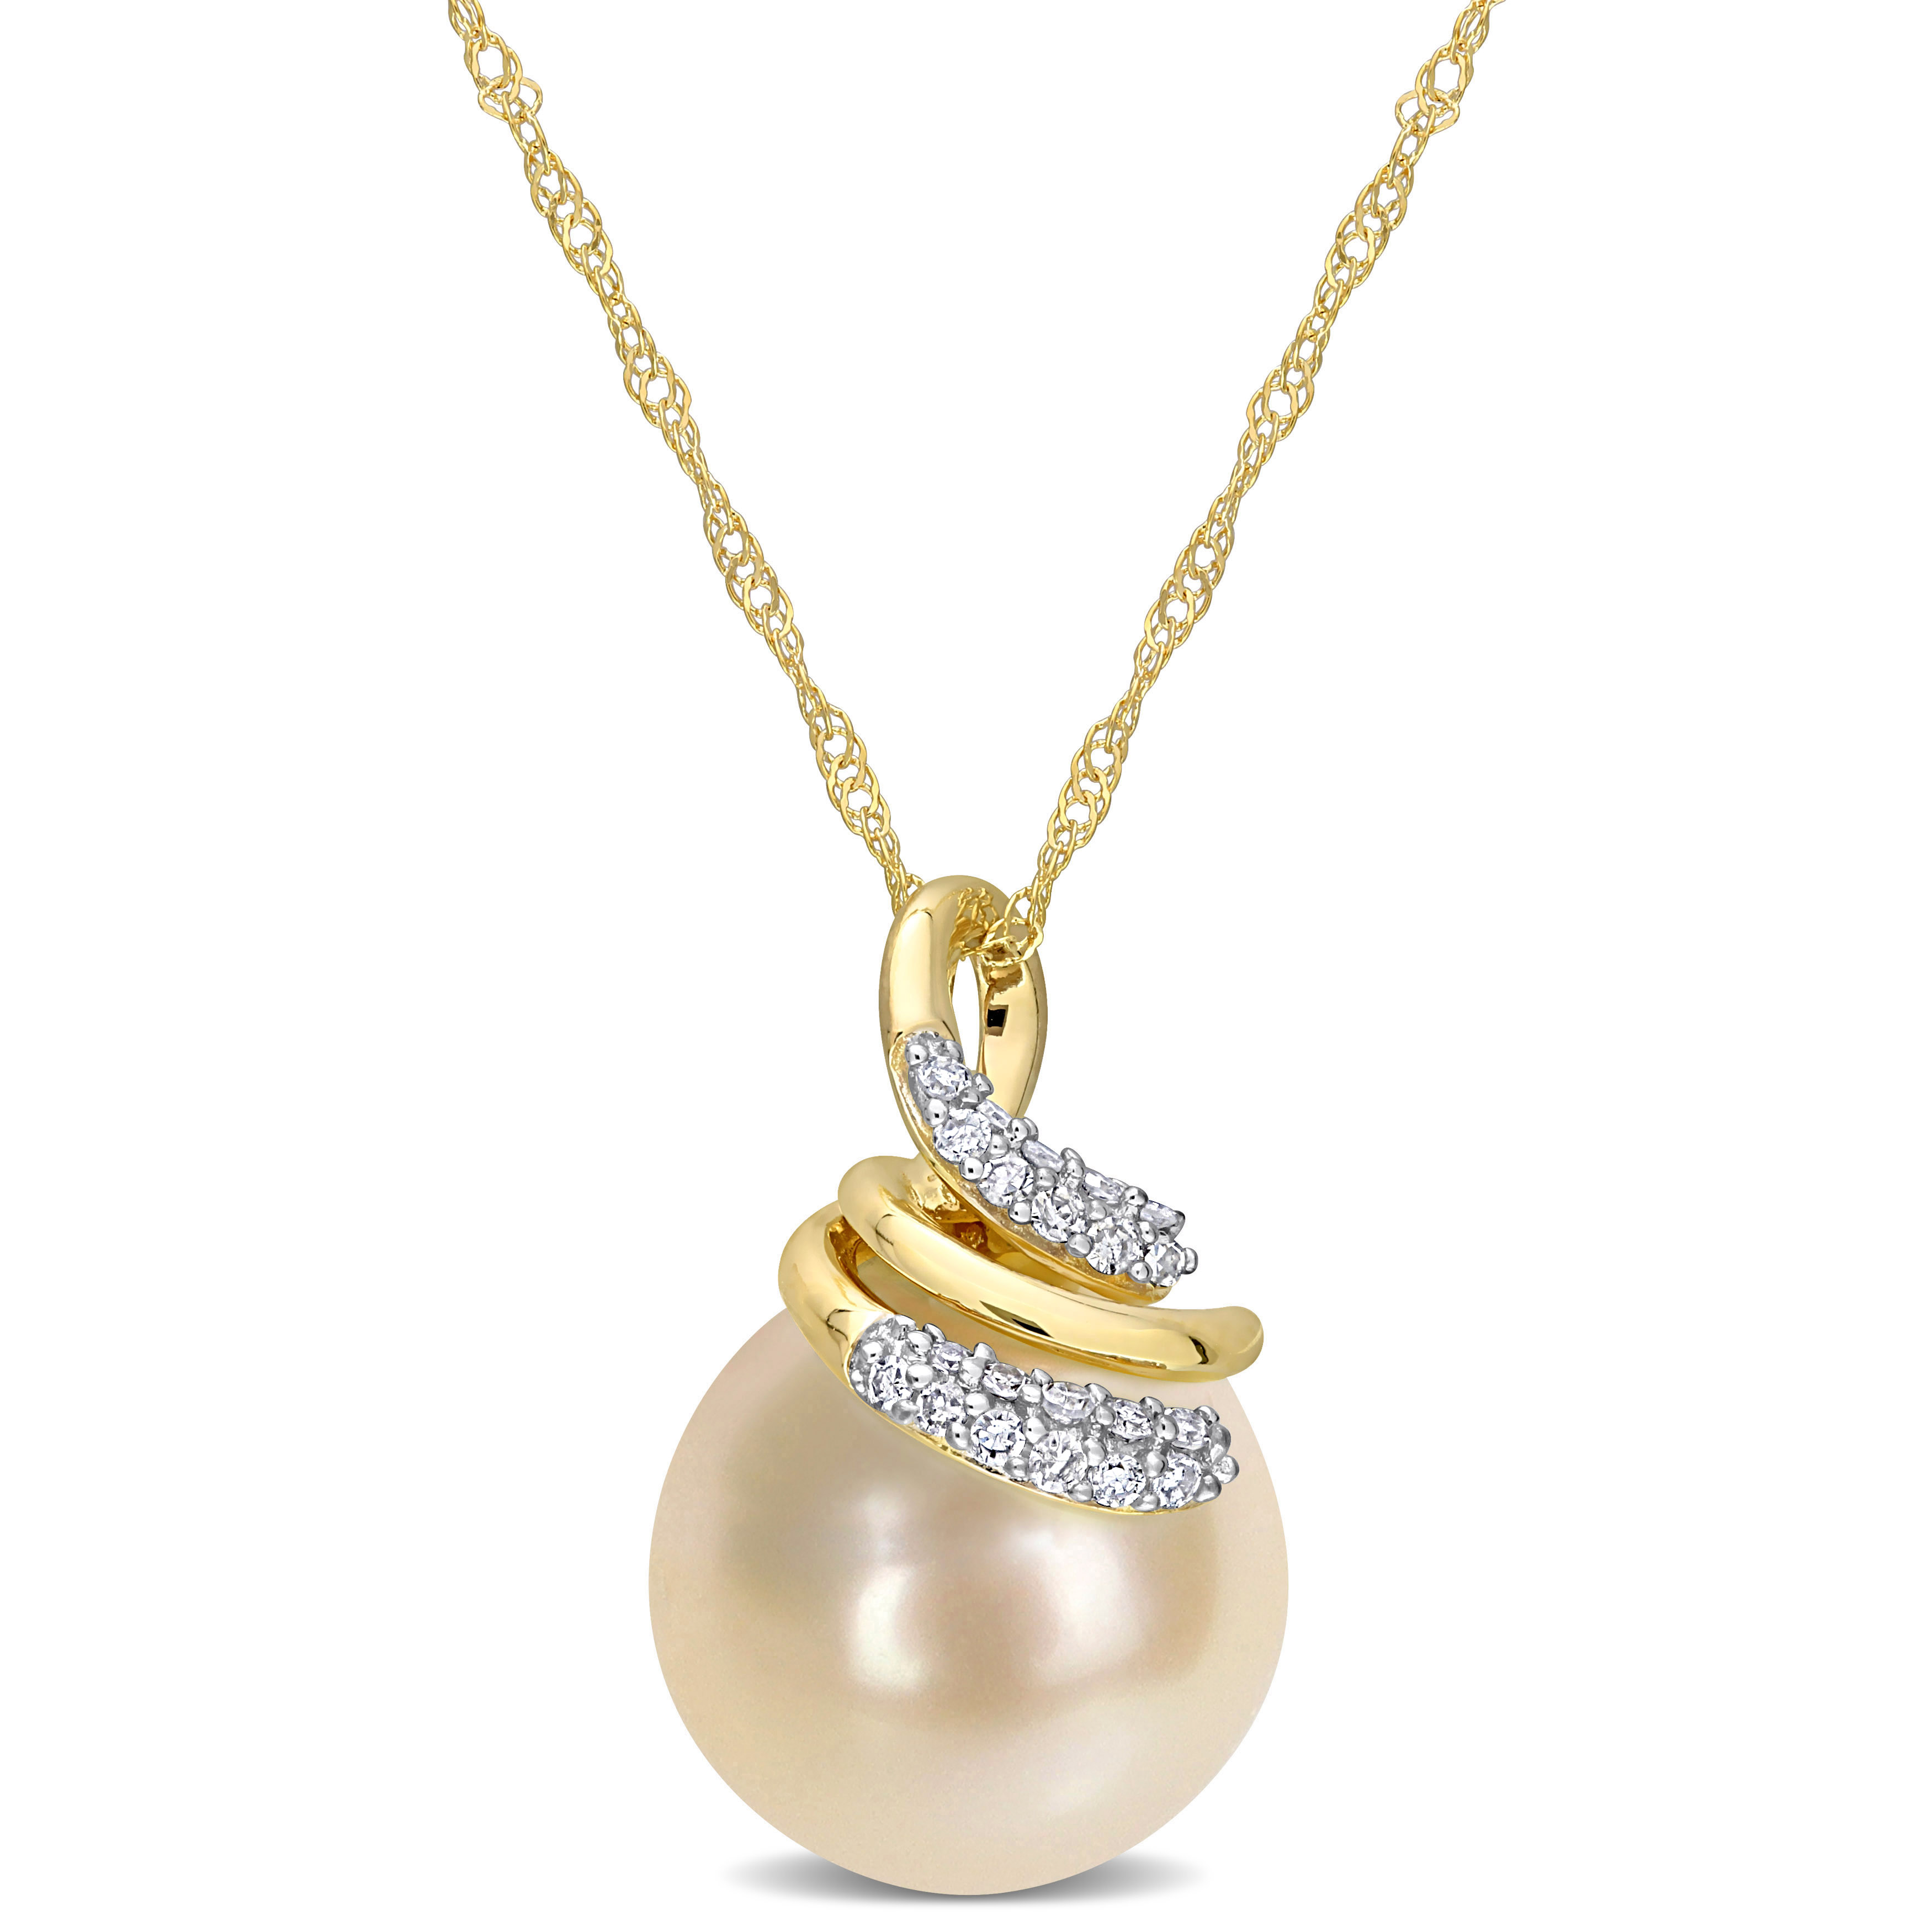 9-10 MM South Sea Cultured Pearl and 1/10 CT TW Diamond Swirl Pendant with Chain in 14k Yellow Gold